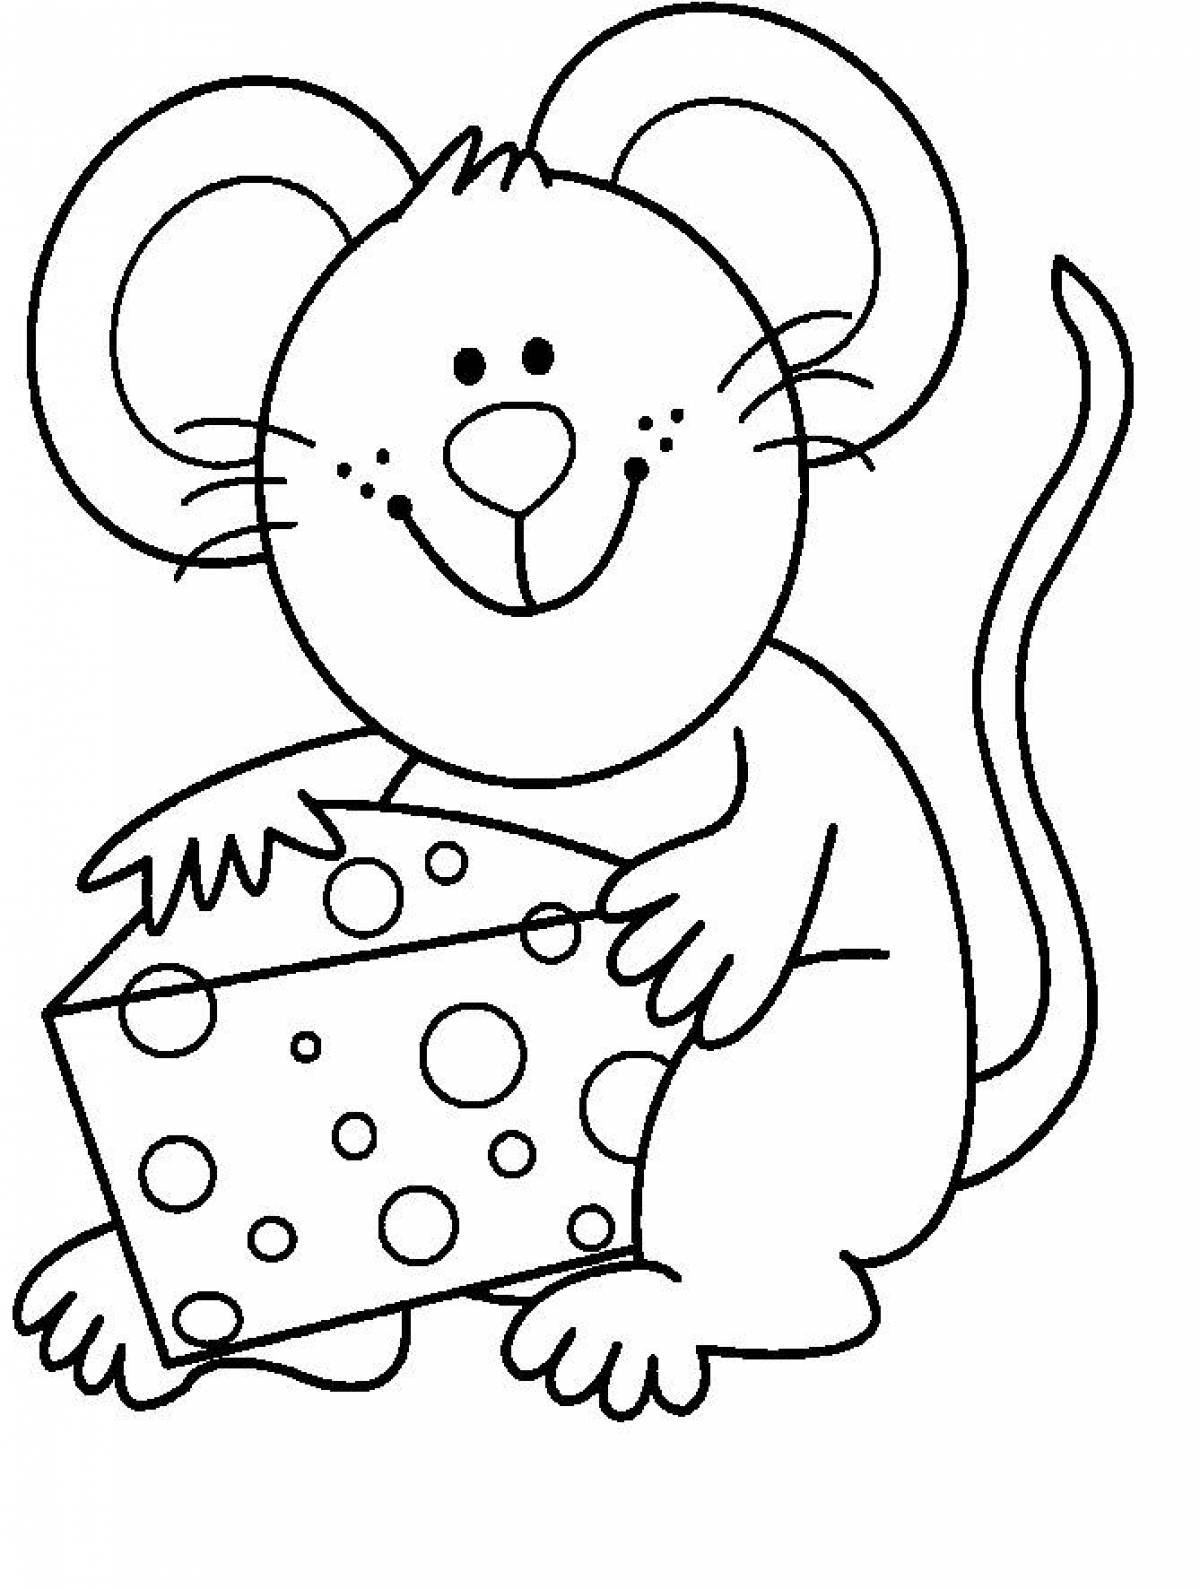 Outstanding mouse coloring page